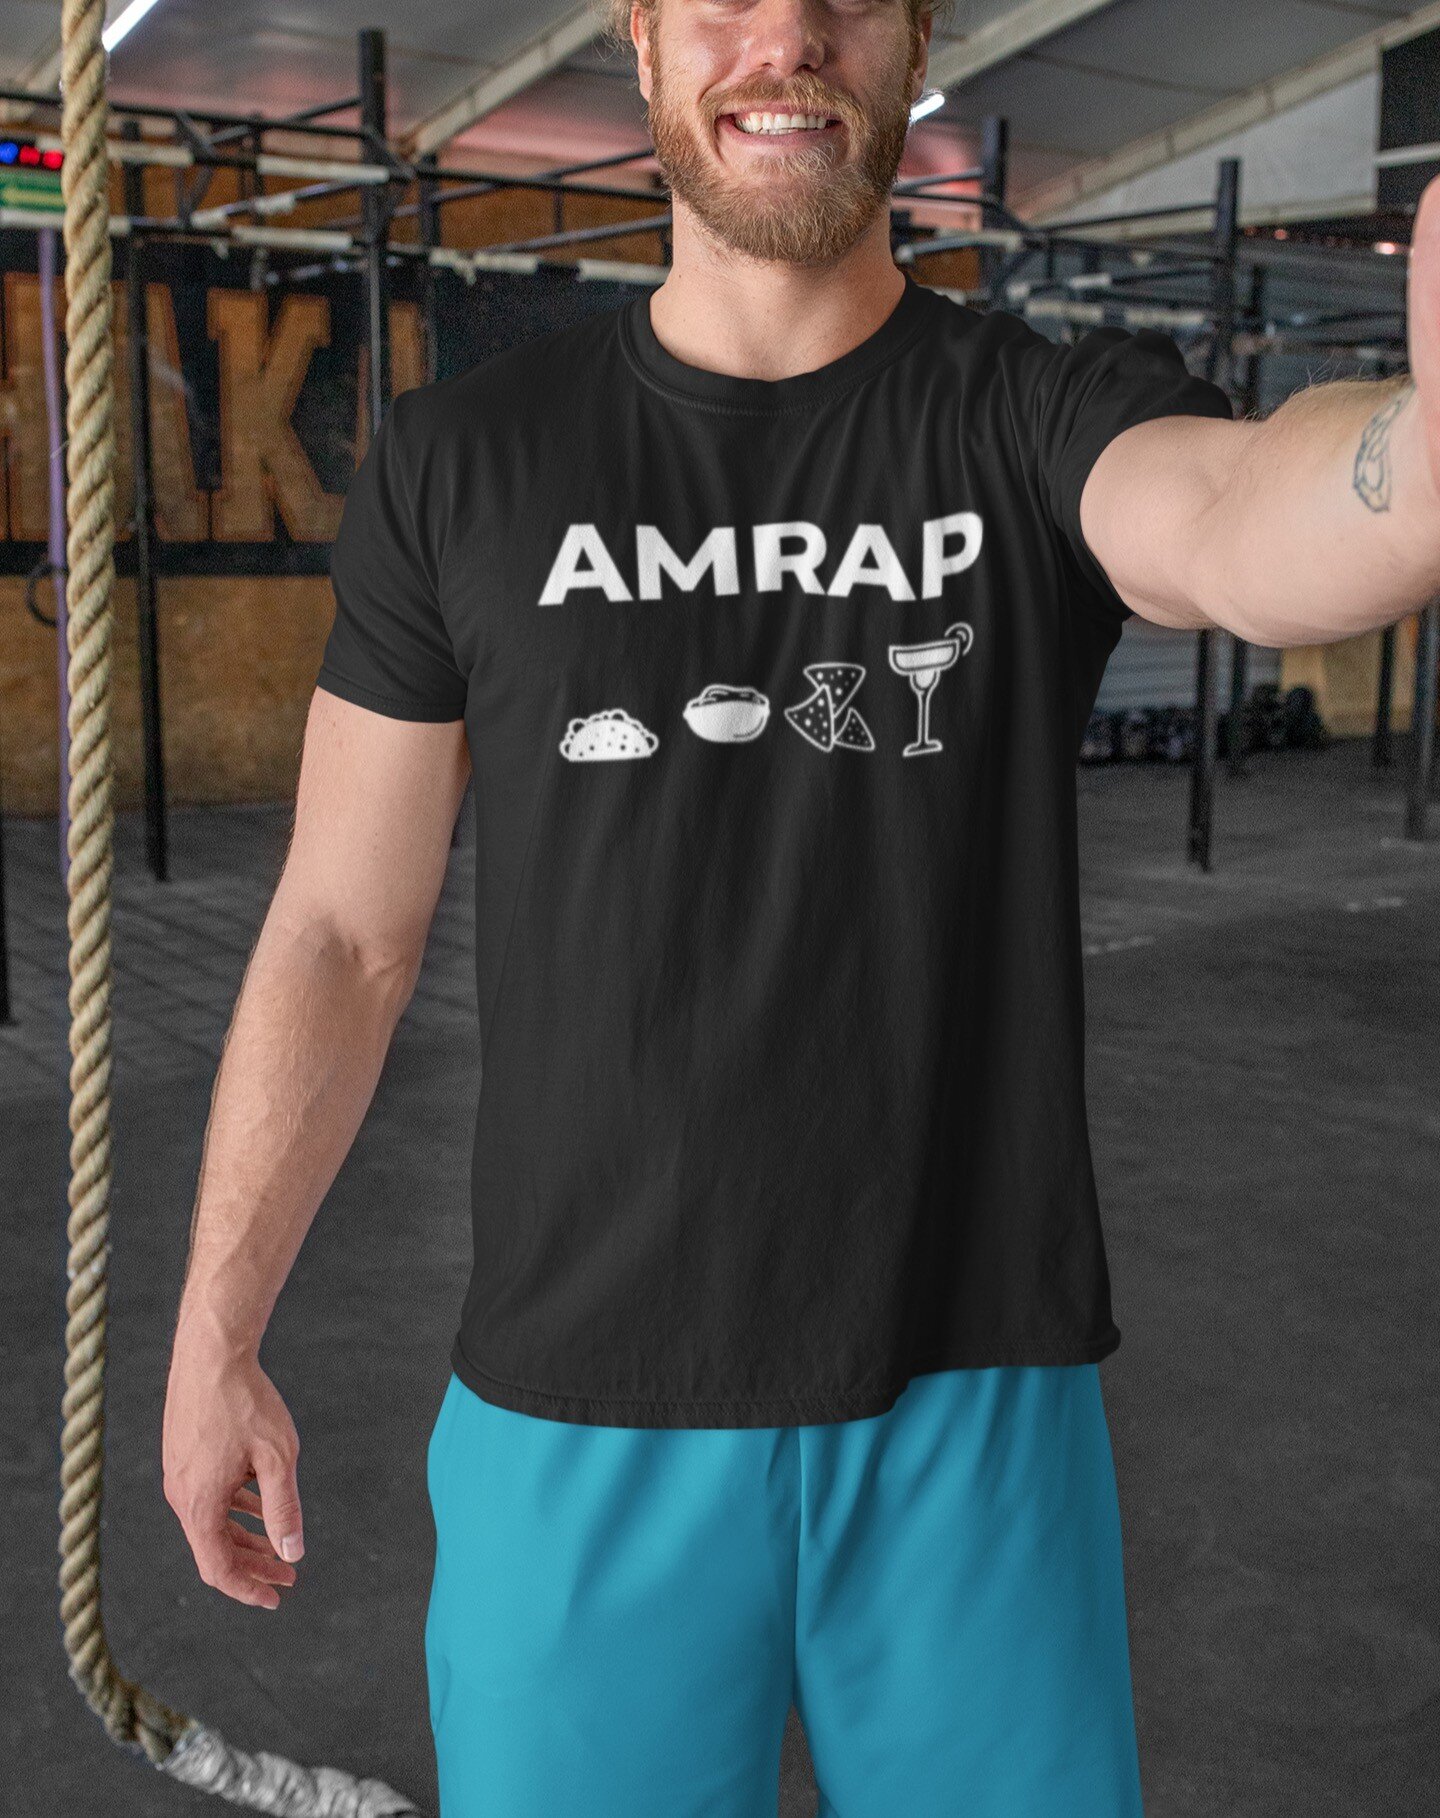 Happy Cinco de Mayo Thicc Fam! We're clocking out and heading to the nearest bar for our favorite AMRAP...

#staythicc #thiccfitapparel #amrap #cincodemayo #crossfitlife